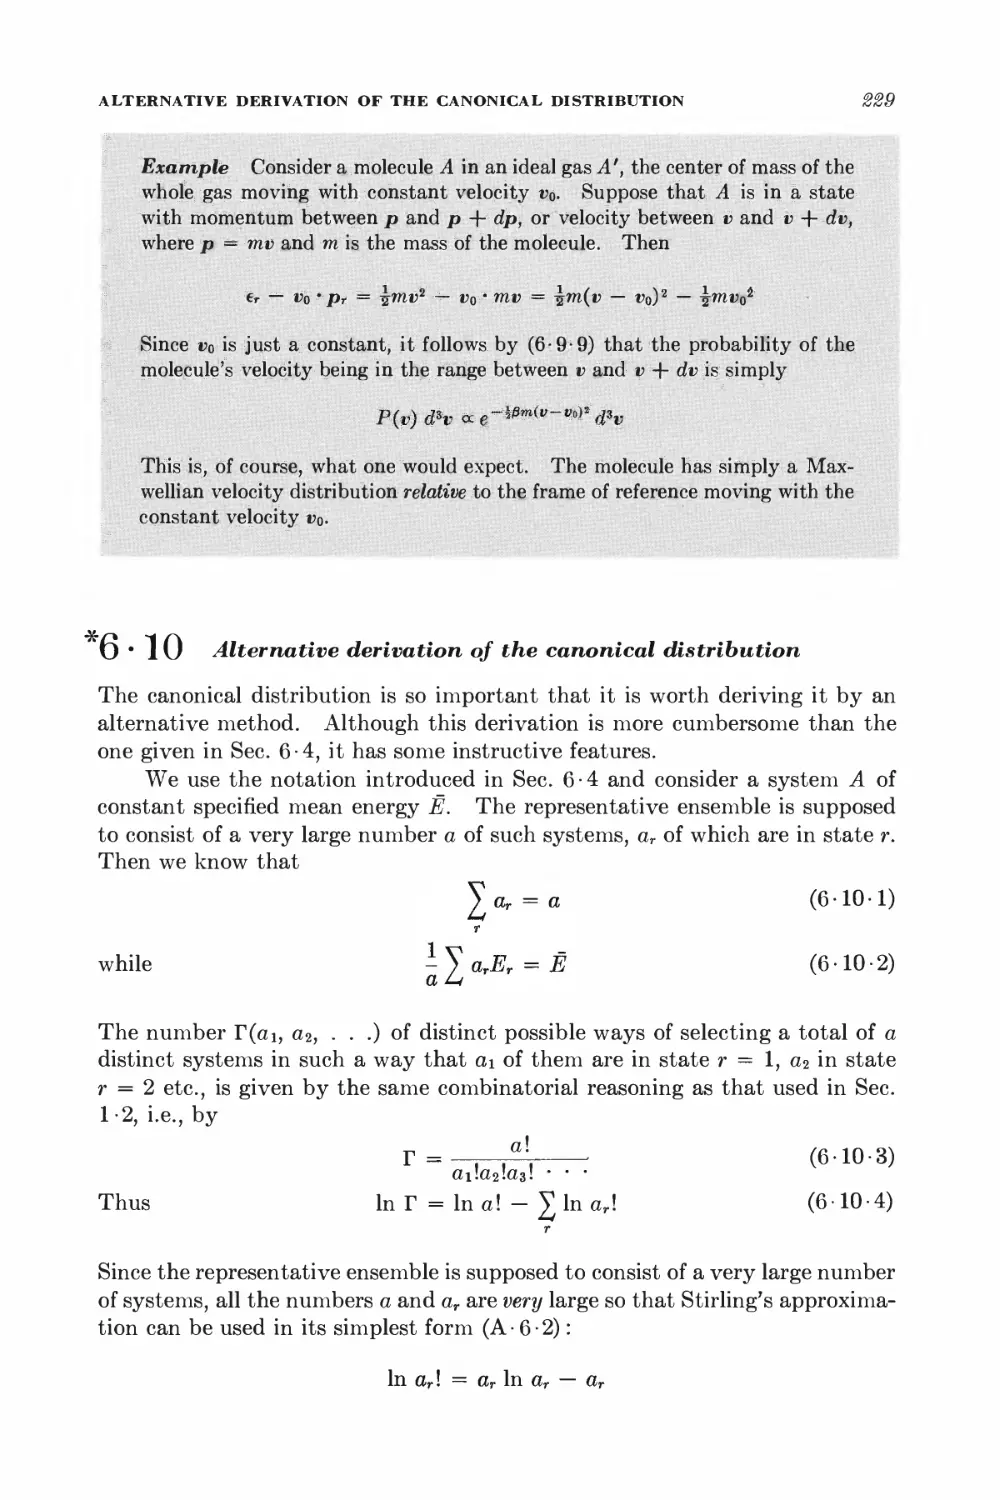 6.10 Alternative derivation of the canonical distribution